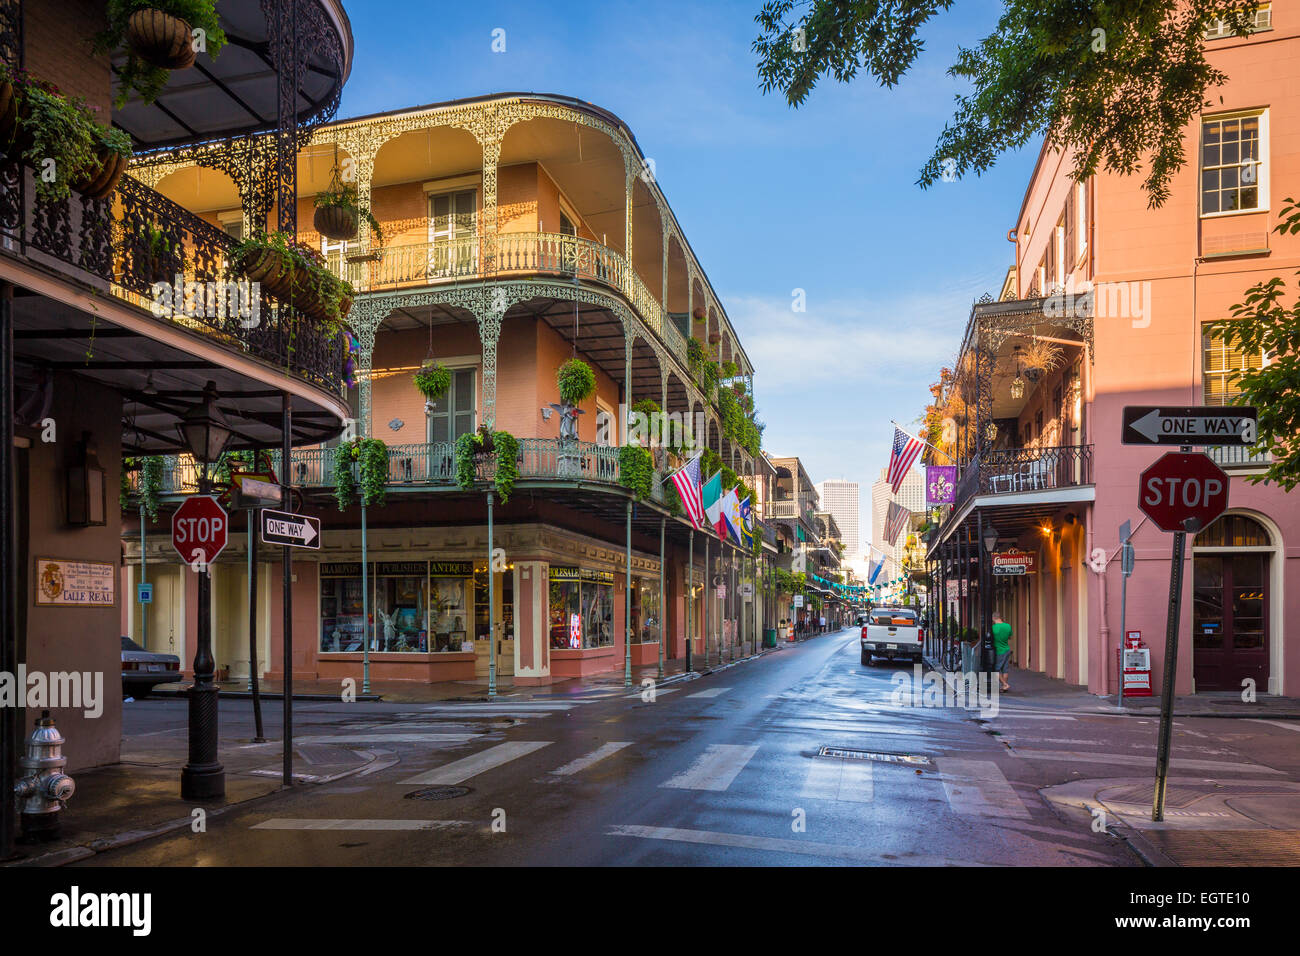 Typical buildings in the French Quarter area of New Orleans, Louisiana.  The French Quarter is the oldest and most famous and vi Stock Photo